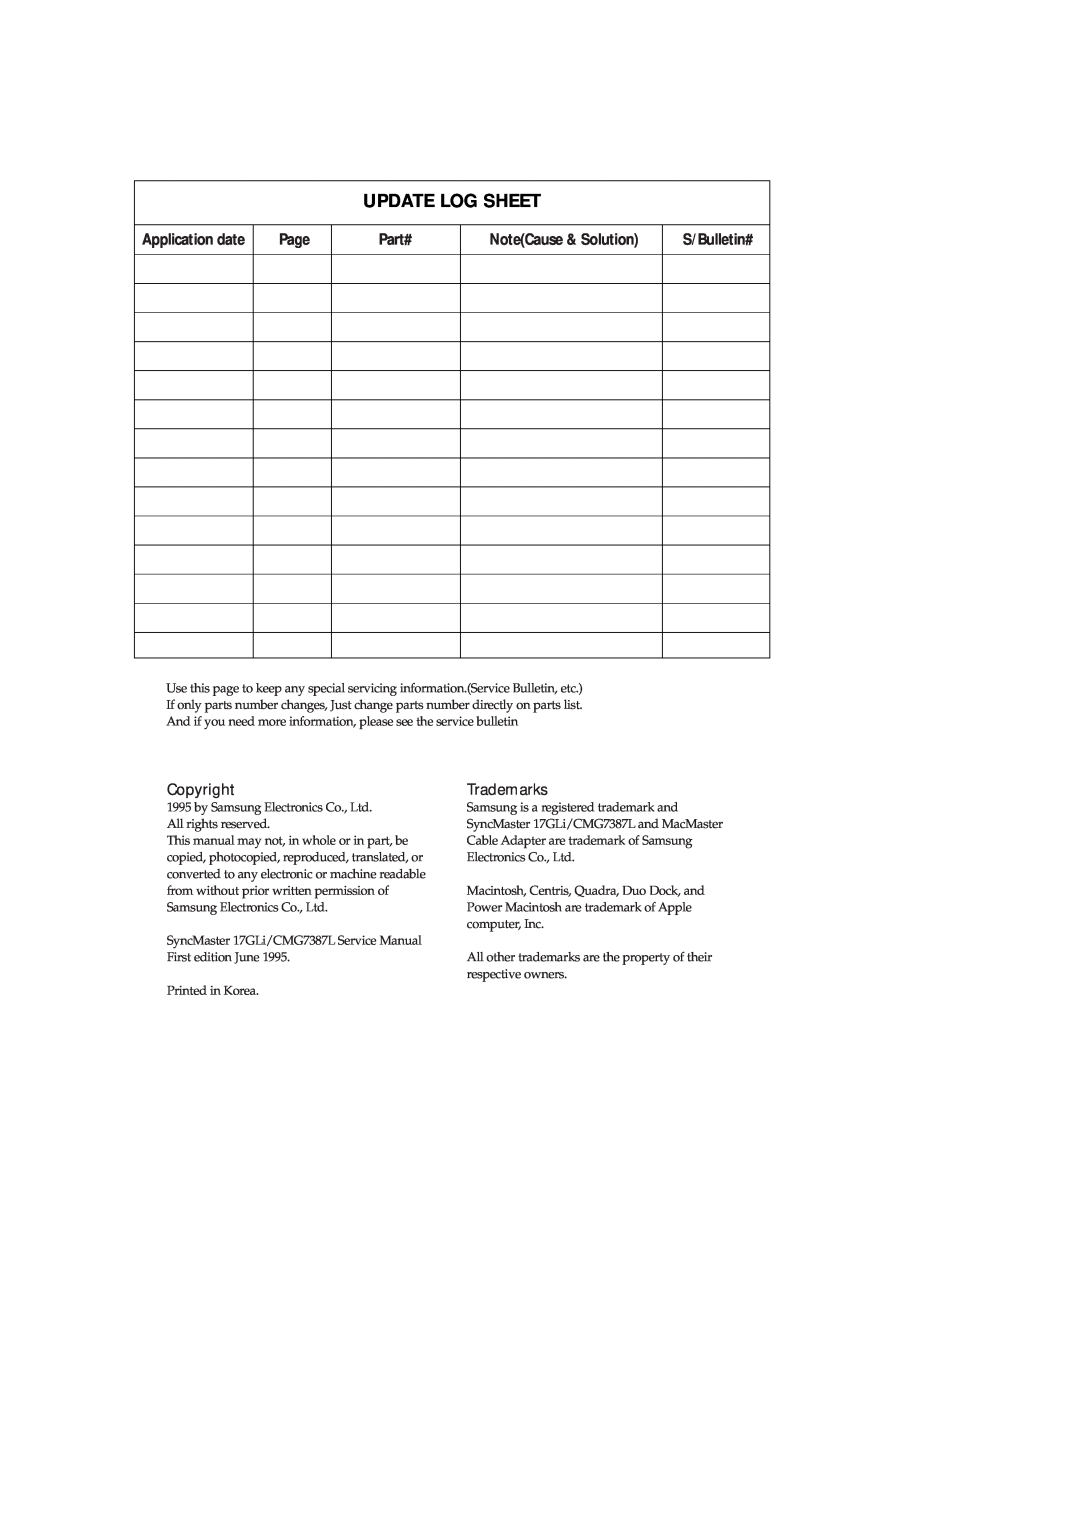 Samsung AW05B05A(AW0500 Update Log Sheet, Copyright, Trademarks, Application date, Page, Part#, NoteCause & Solution 